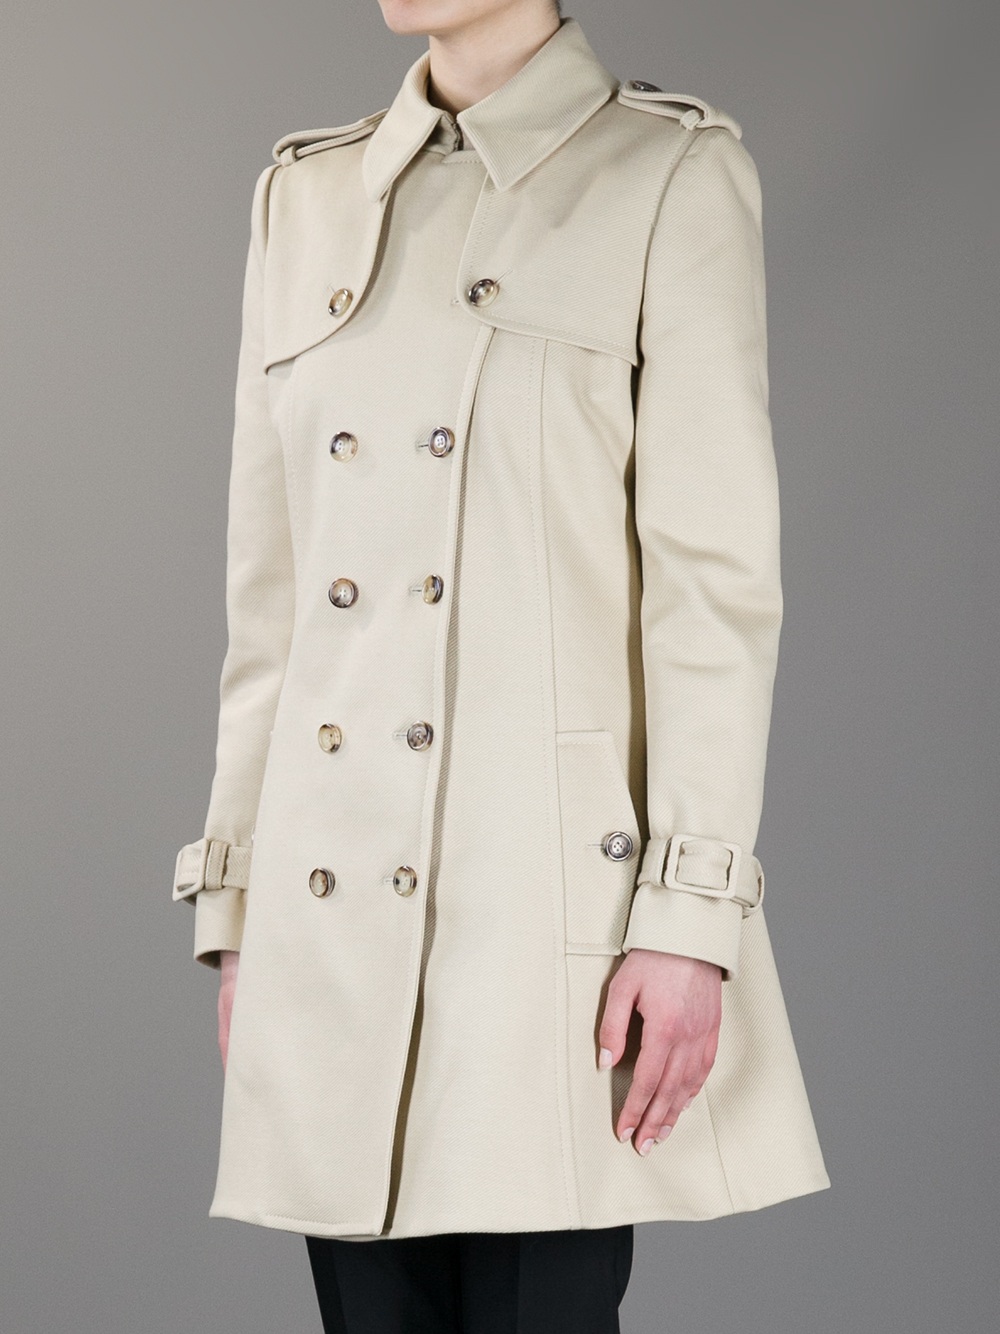 Lyst - Boutique moschino Classic Trench Coat in Natural